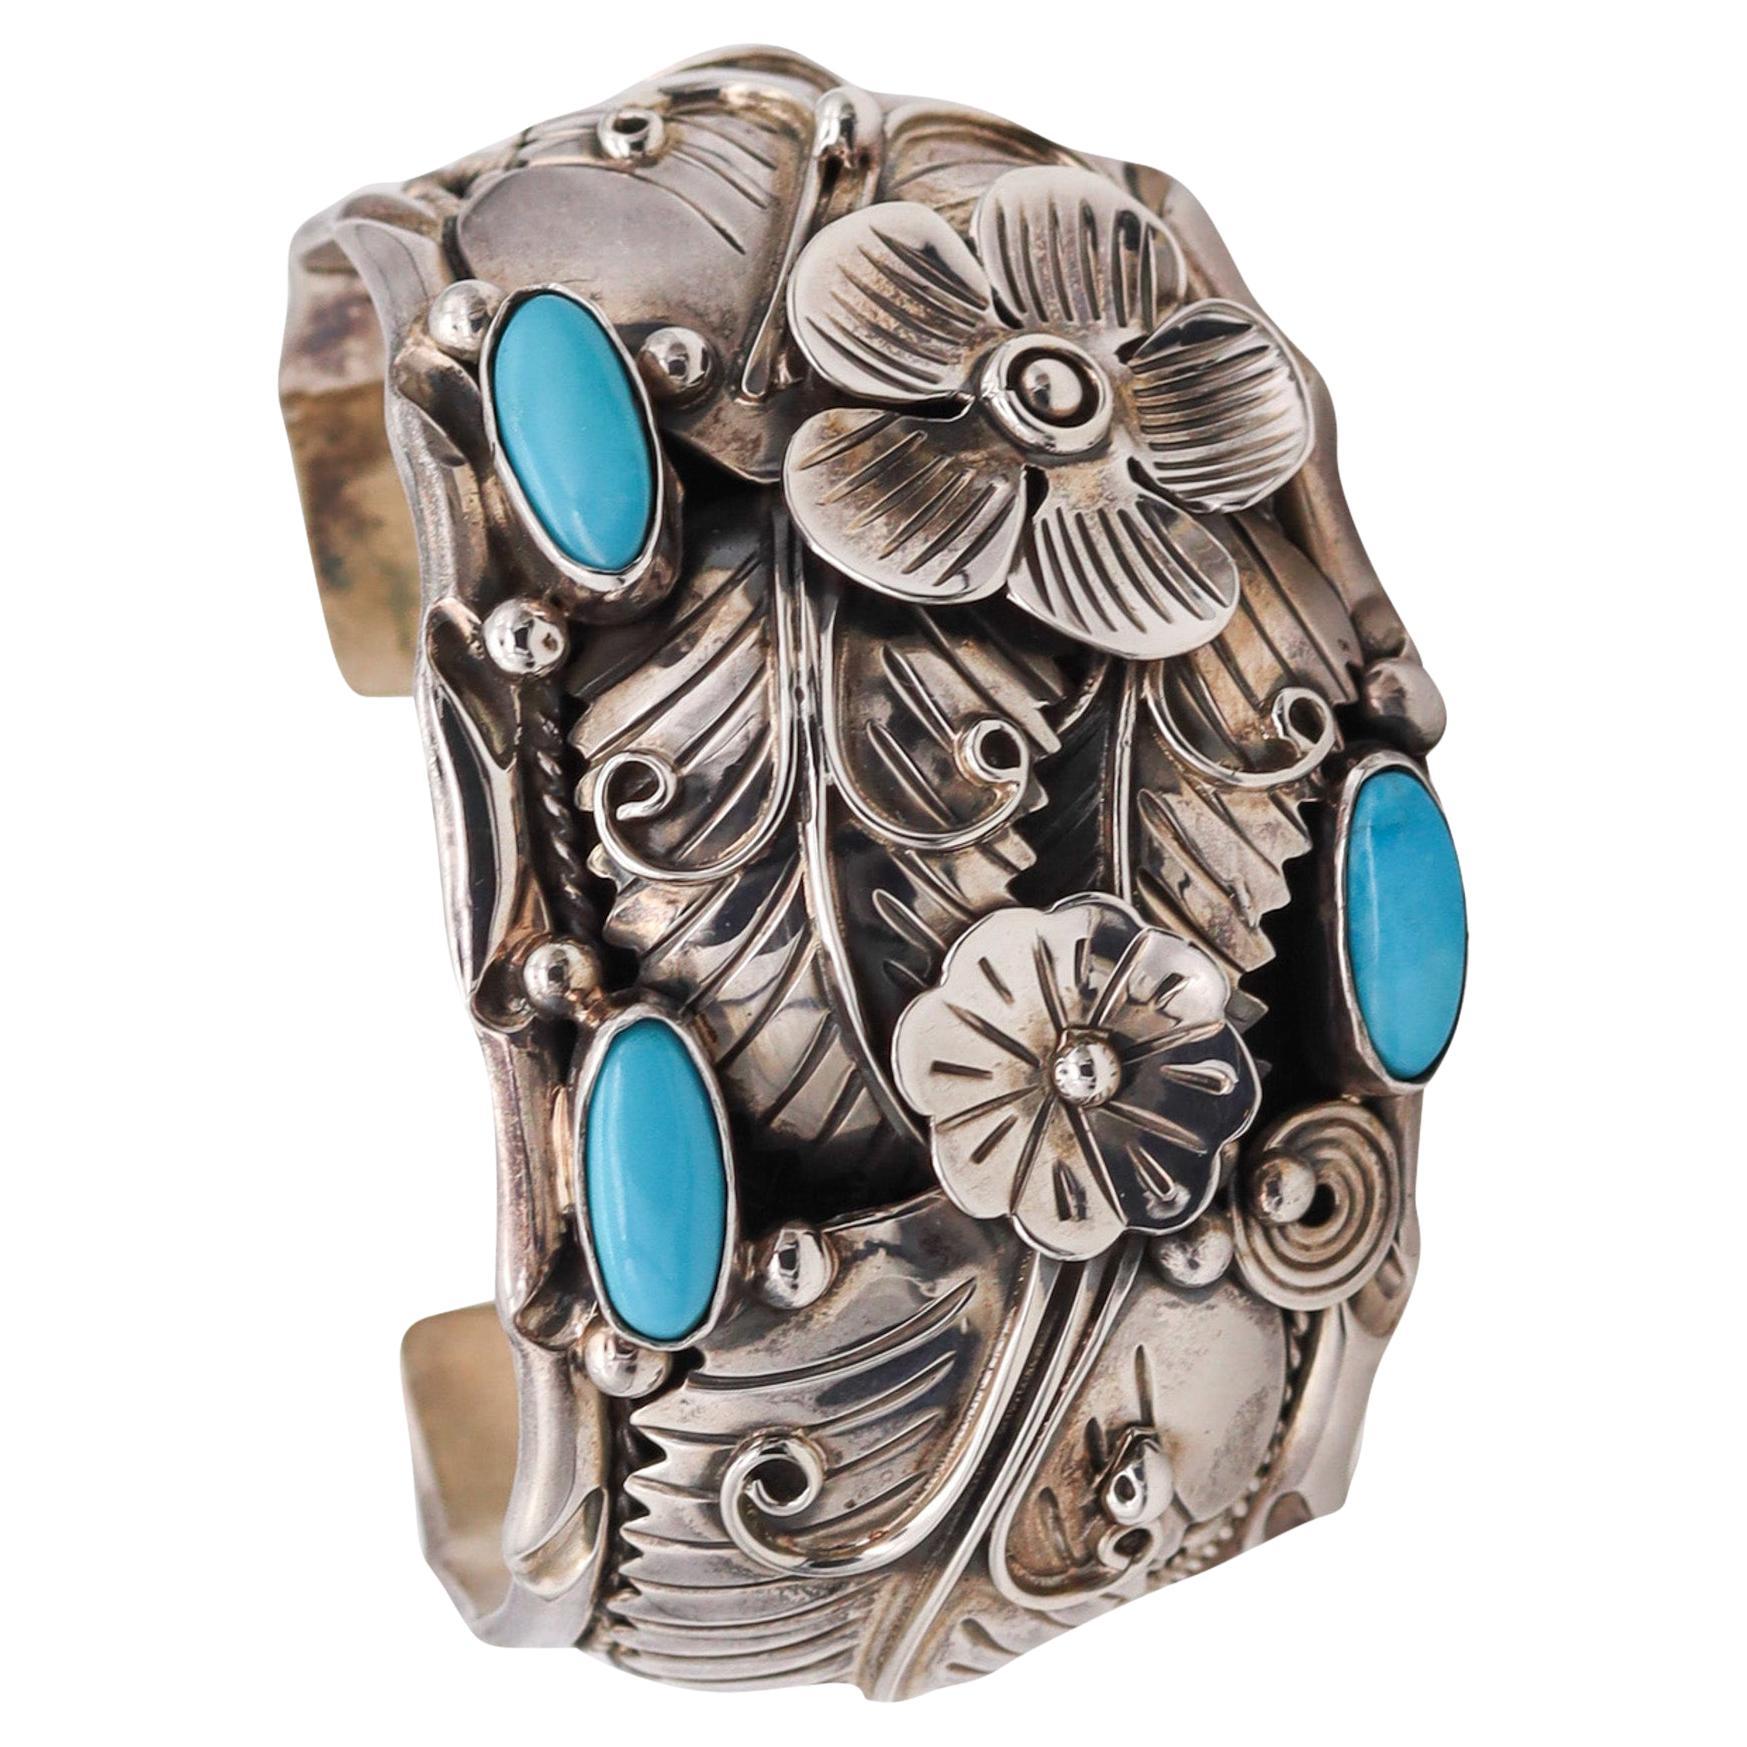 Mexico 1950 Taxco Statement Cuff Bracelet In 925 Sterling Silver With Turquoises For Sale